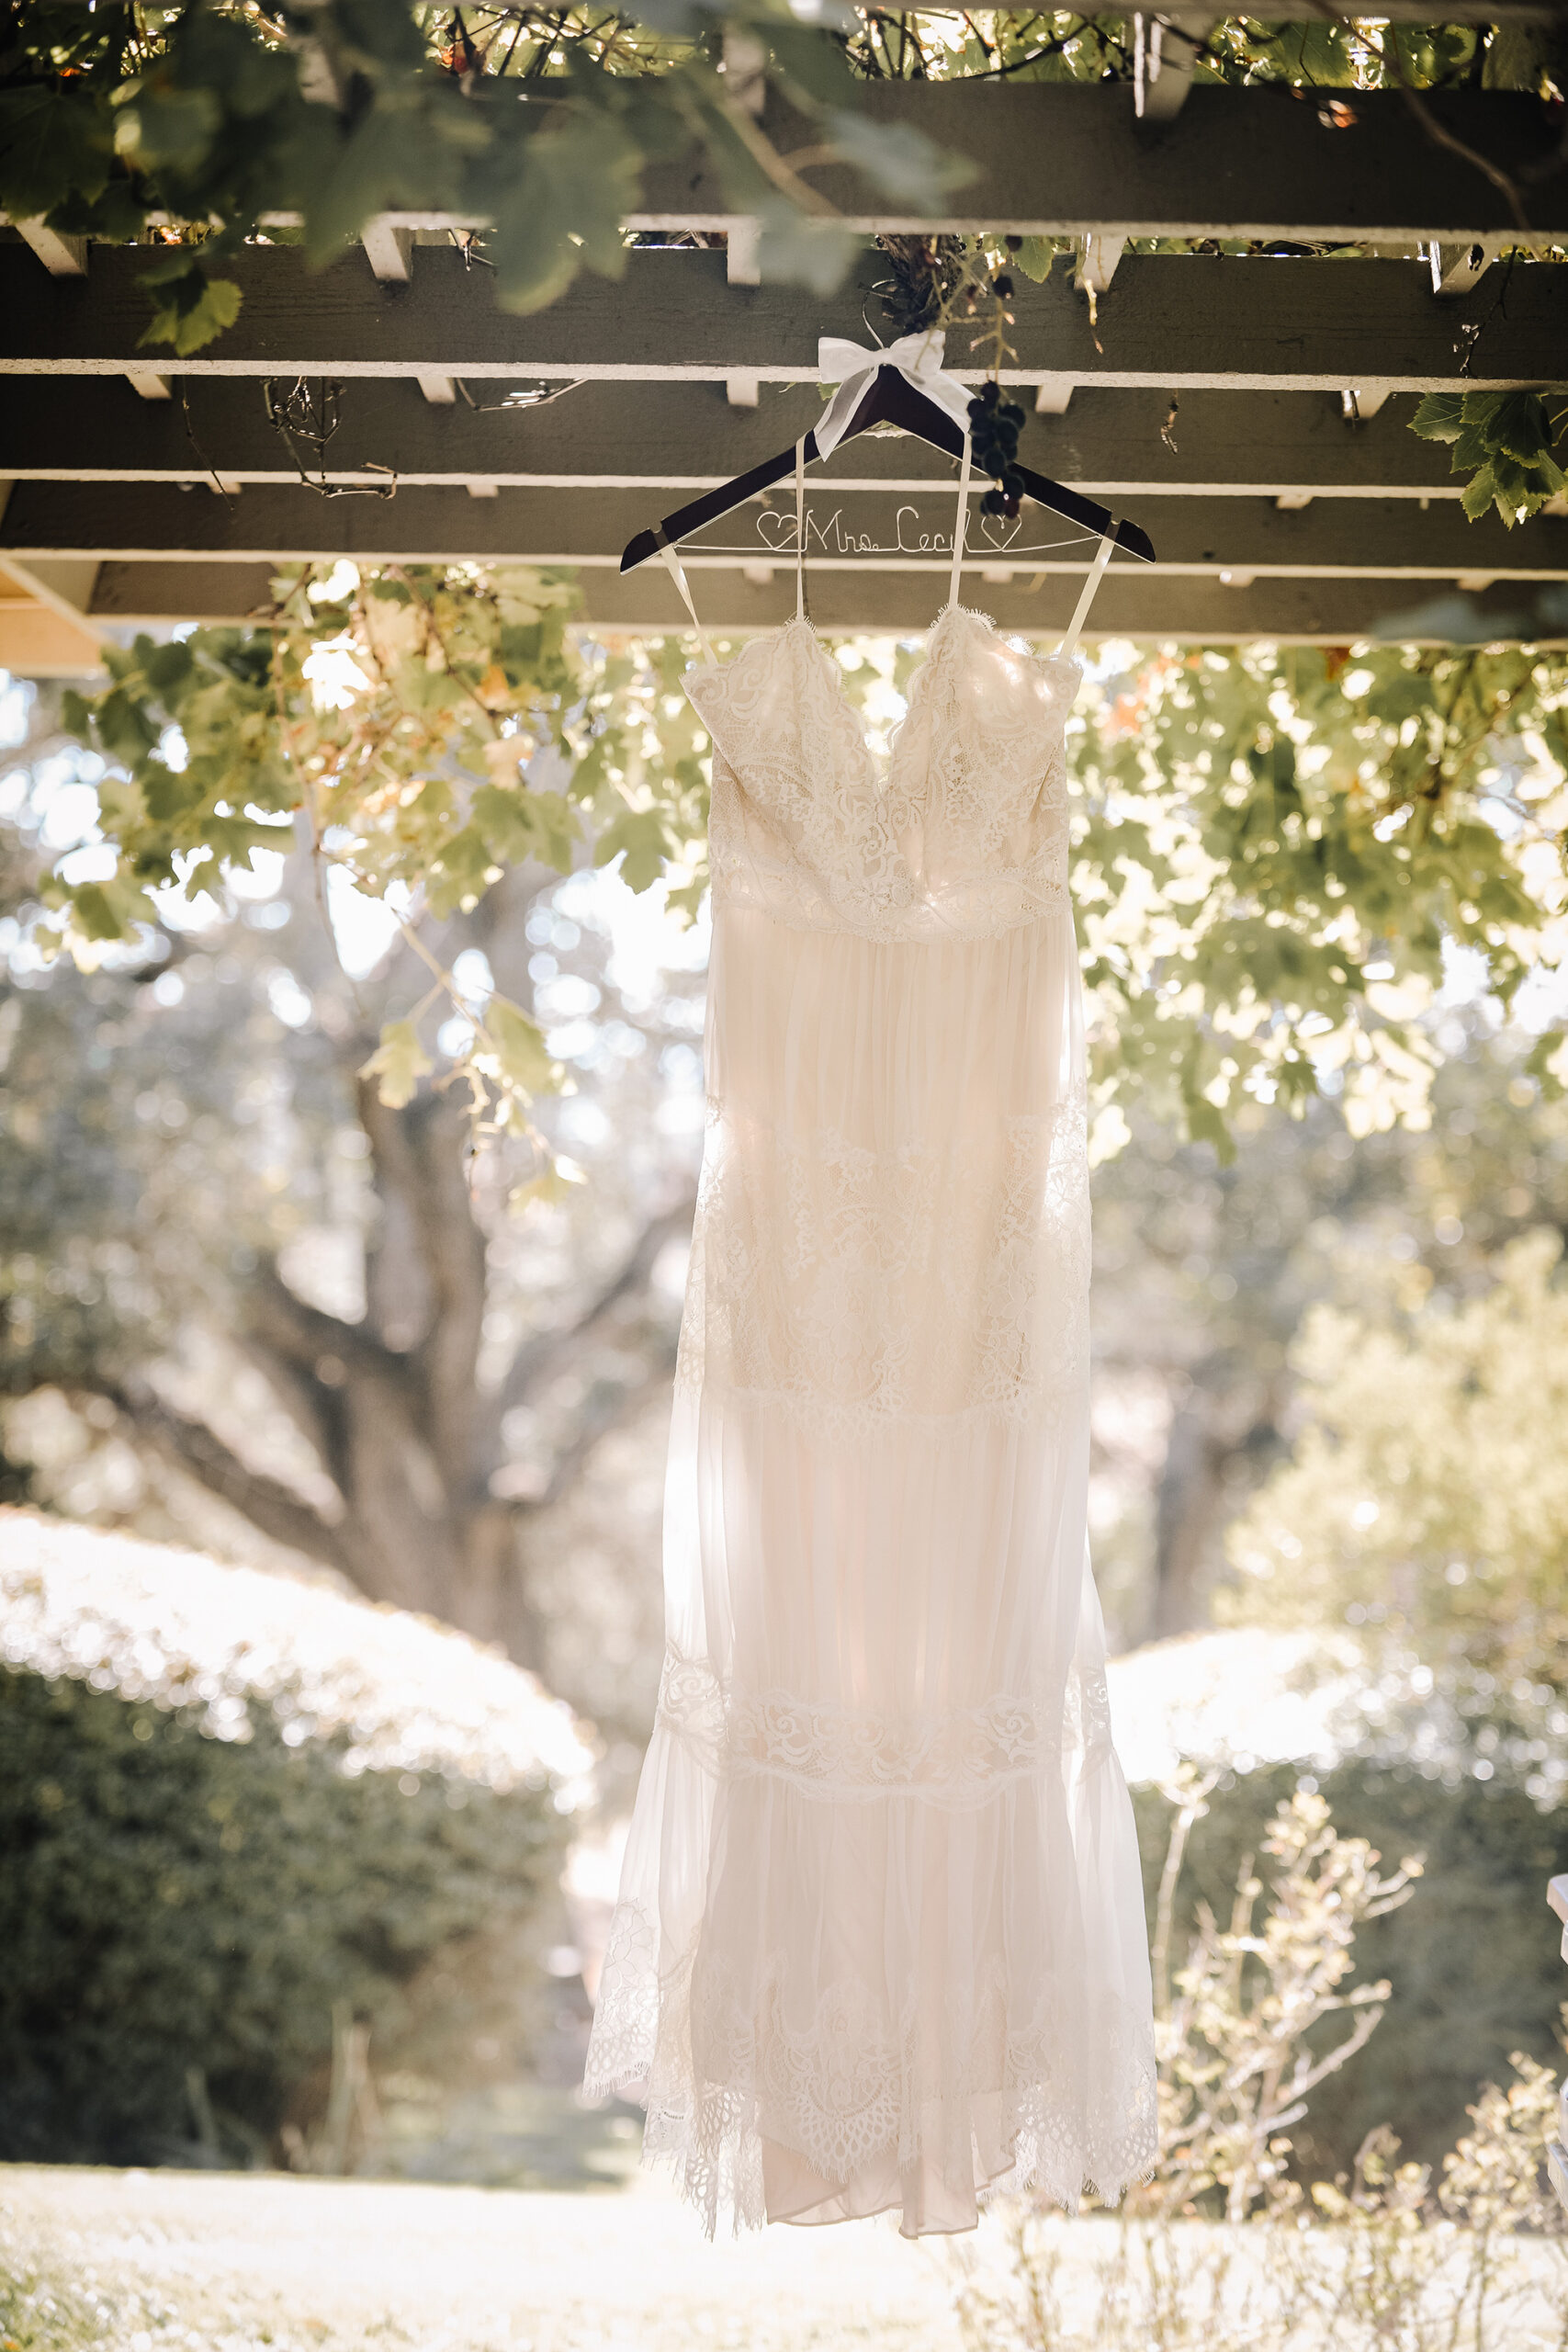 Kristen Carter Rustic Winery Wedding KDot Photography SBS 001 scaled